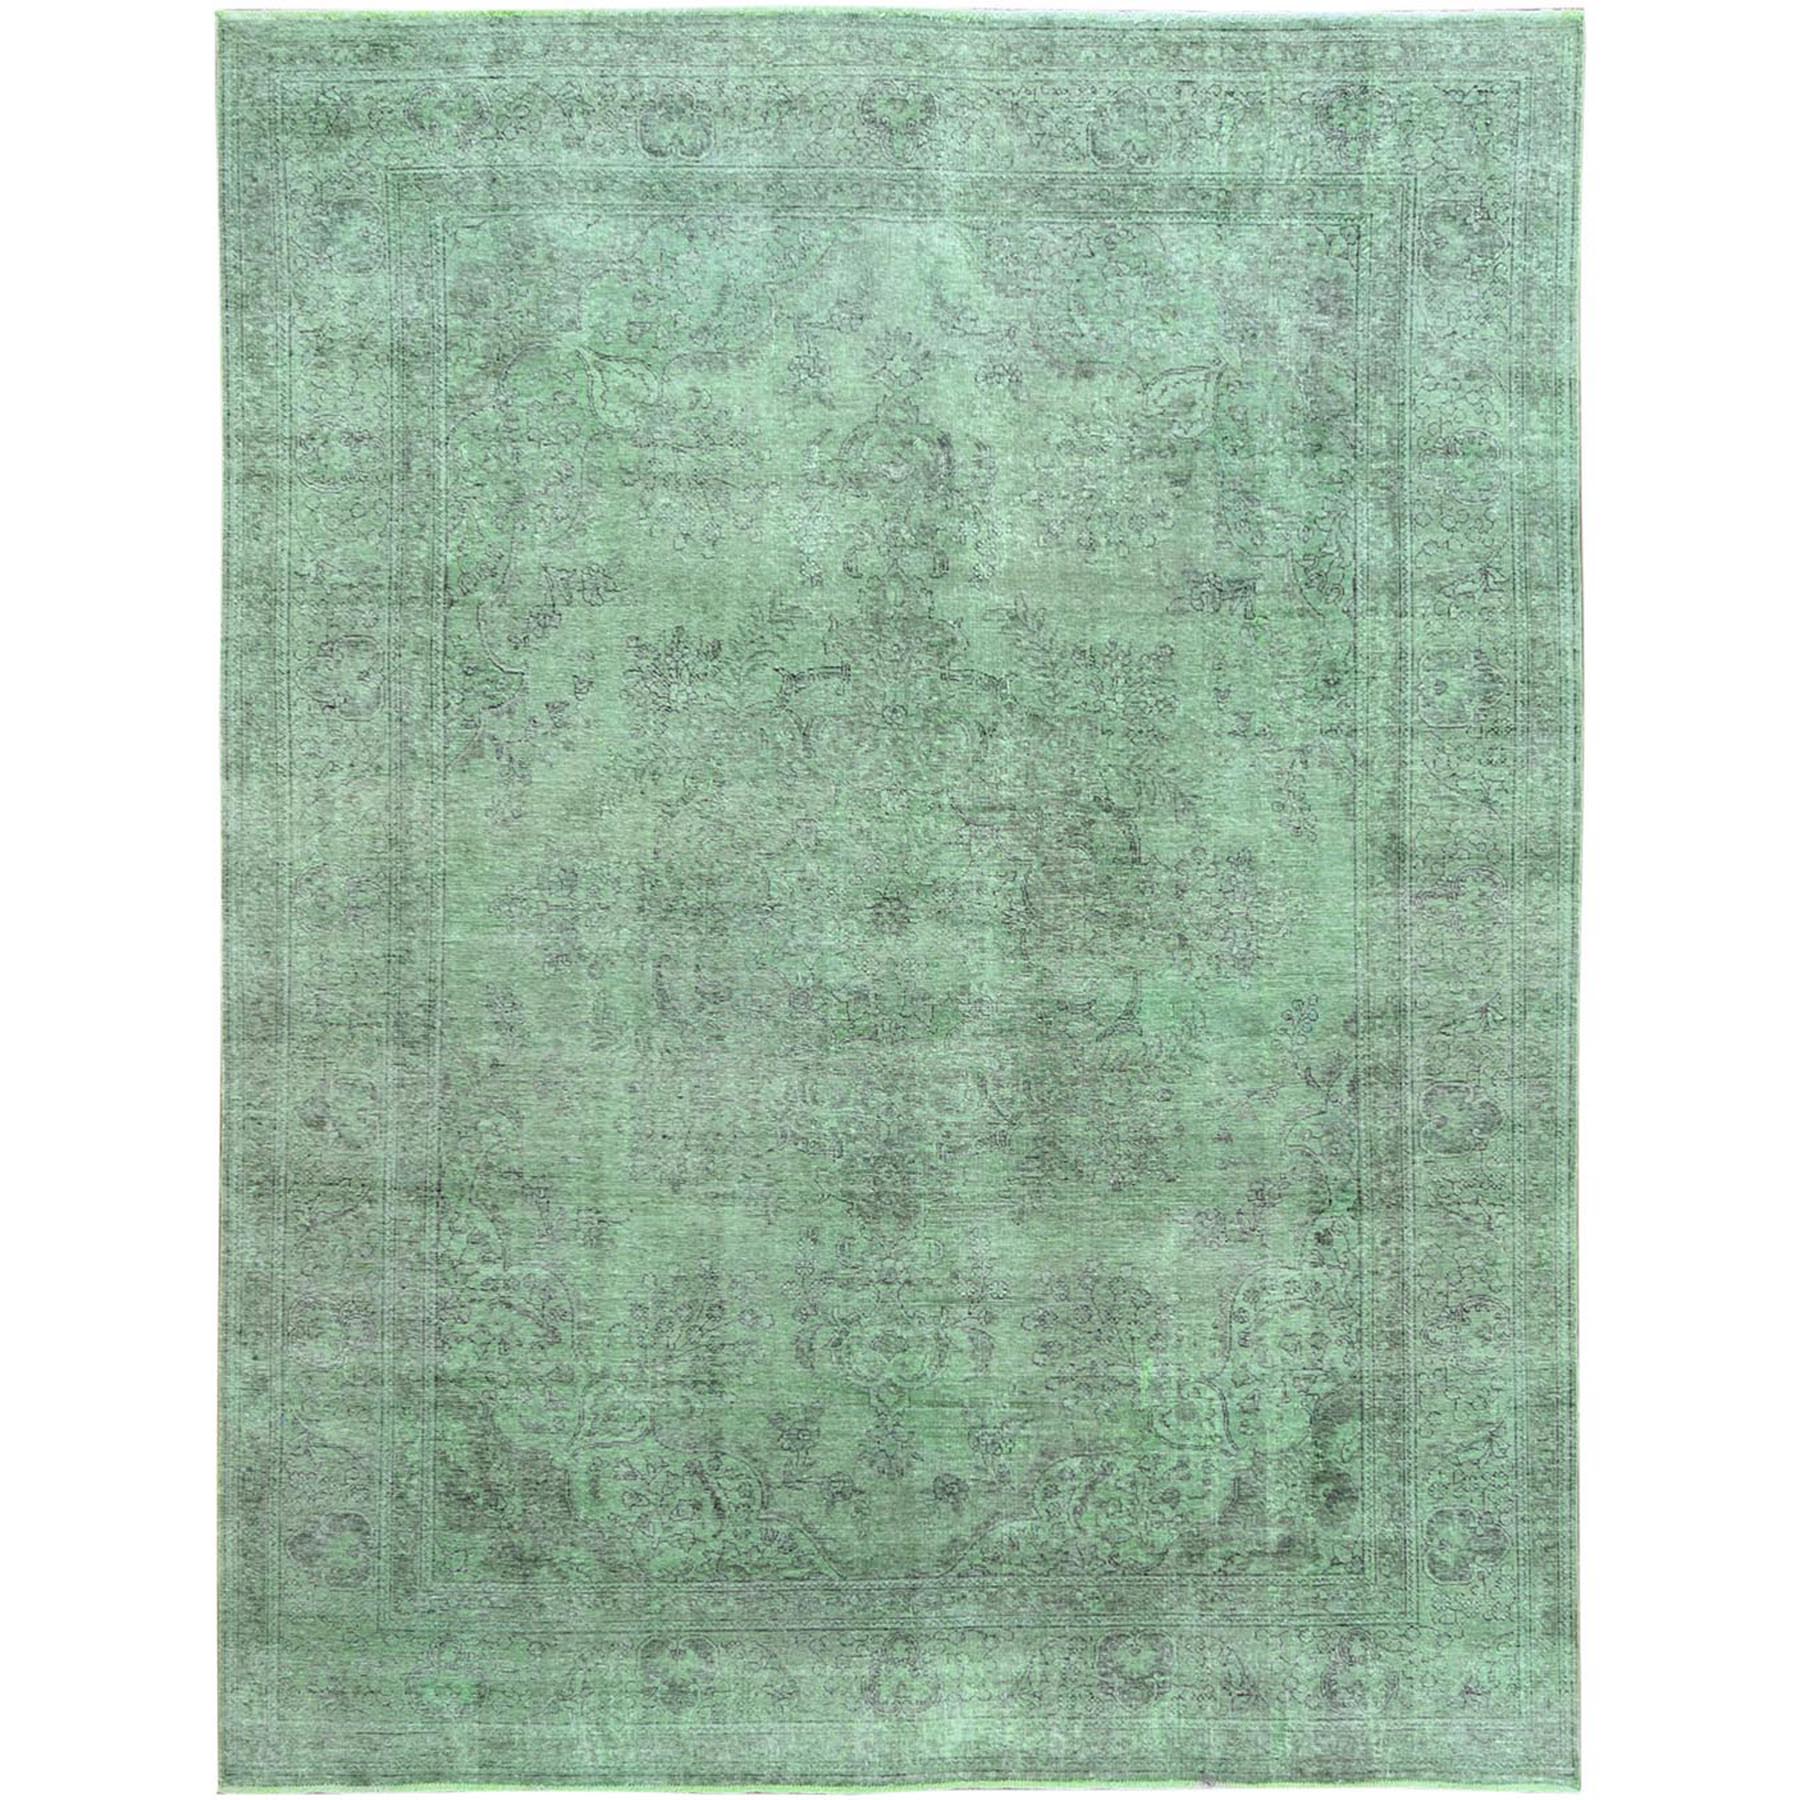 9'9"x12'6" Green Organic Wool Shabby Chic Clean Persian Tabriz With Medallion Design Vintage Look Sheared Low Hand Woven Oriental Rug 